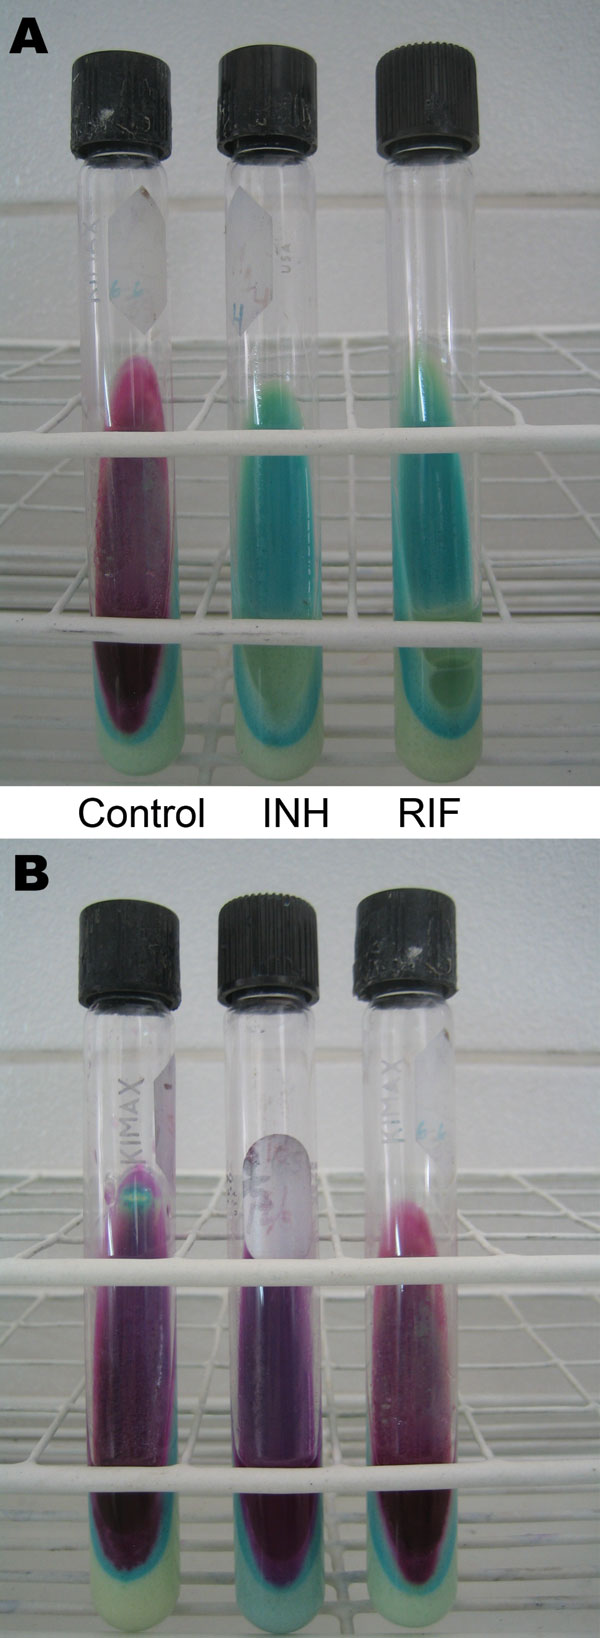 Description and costs of the direct Griess method in Peru. A) Pan-susceptible Mycobacterium tuberculosis isolate. B) M. tuberculosis isolate resistant to isoniazid (INH) and rifampin (RIF). The left (control) tube in panel A and all tubes in panel B indicate mycobacterial growth. The costs of the test are US $5.30 per sample, including personnel, materials (items that can be reused), and supplies (reagents and consumable items), and US $4.80 per sample, including materials and supplies.